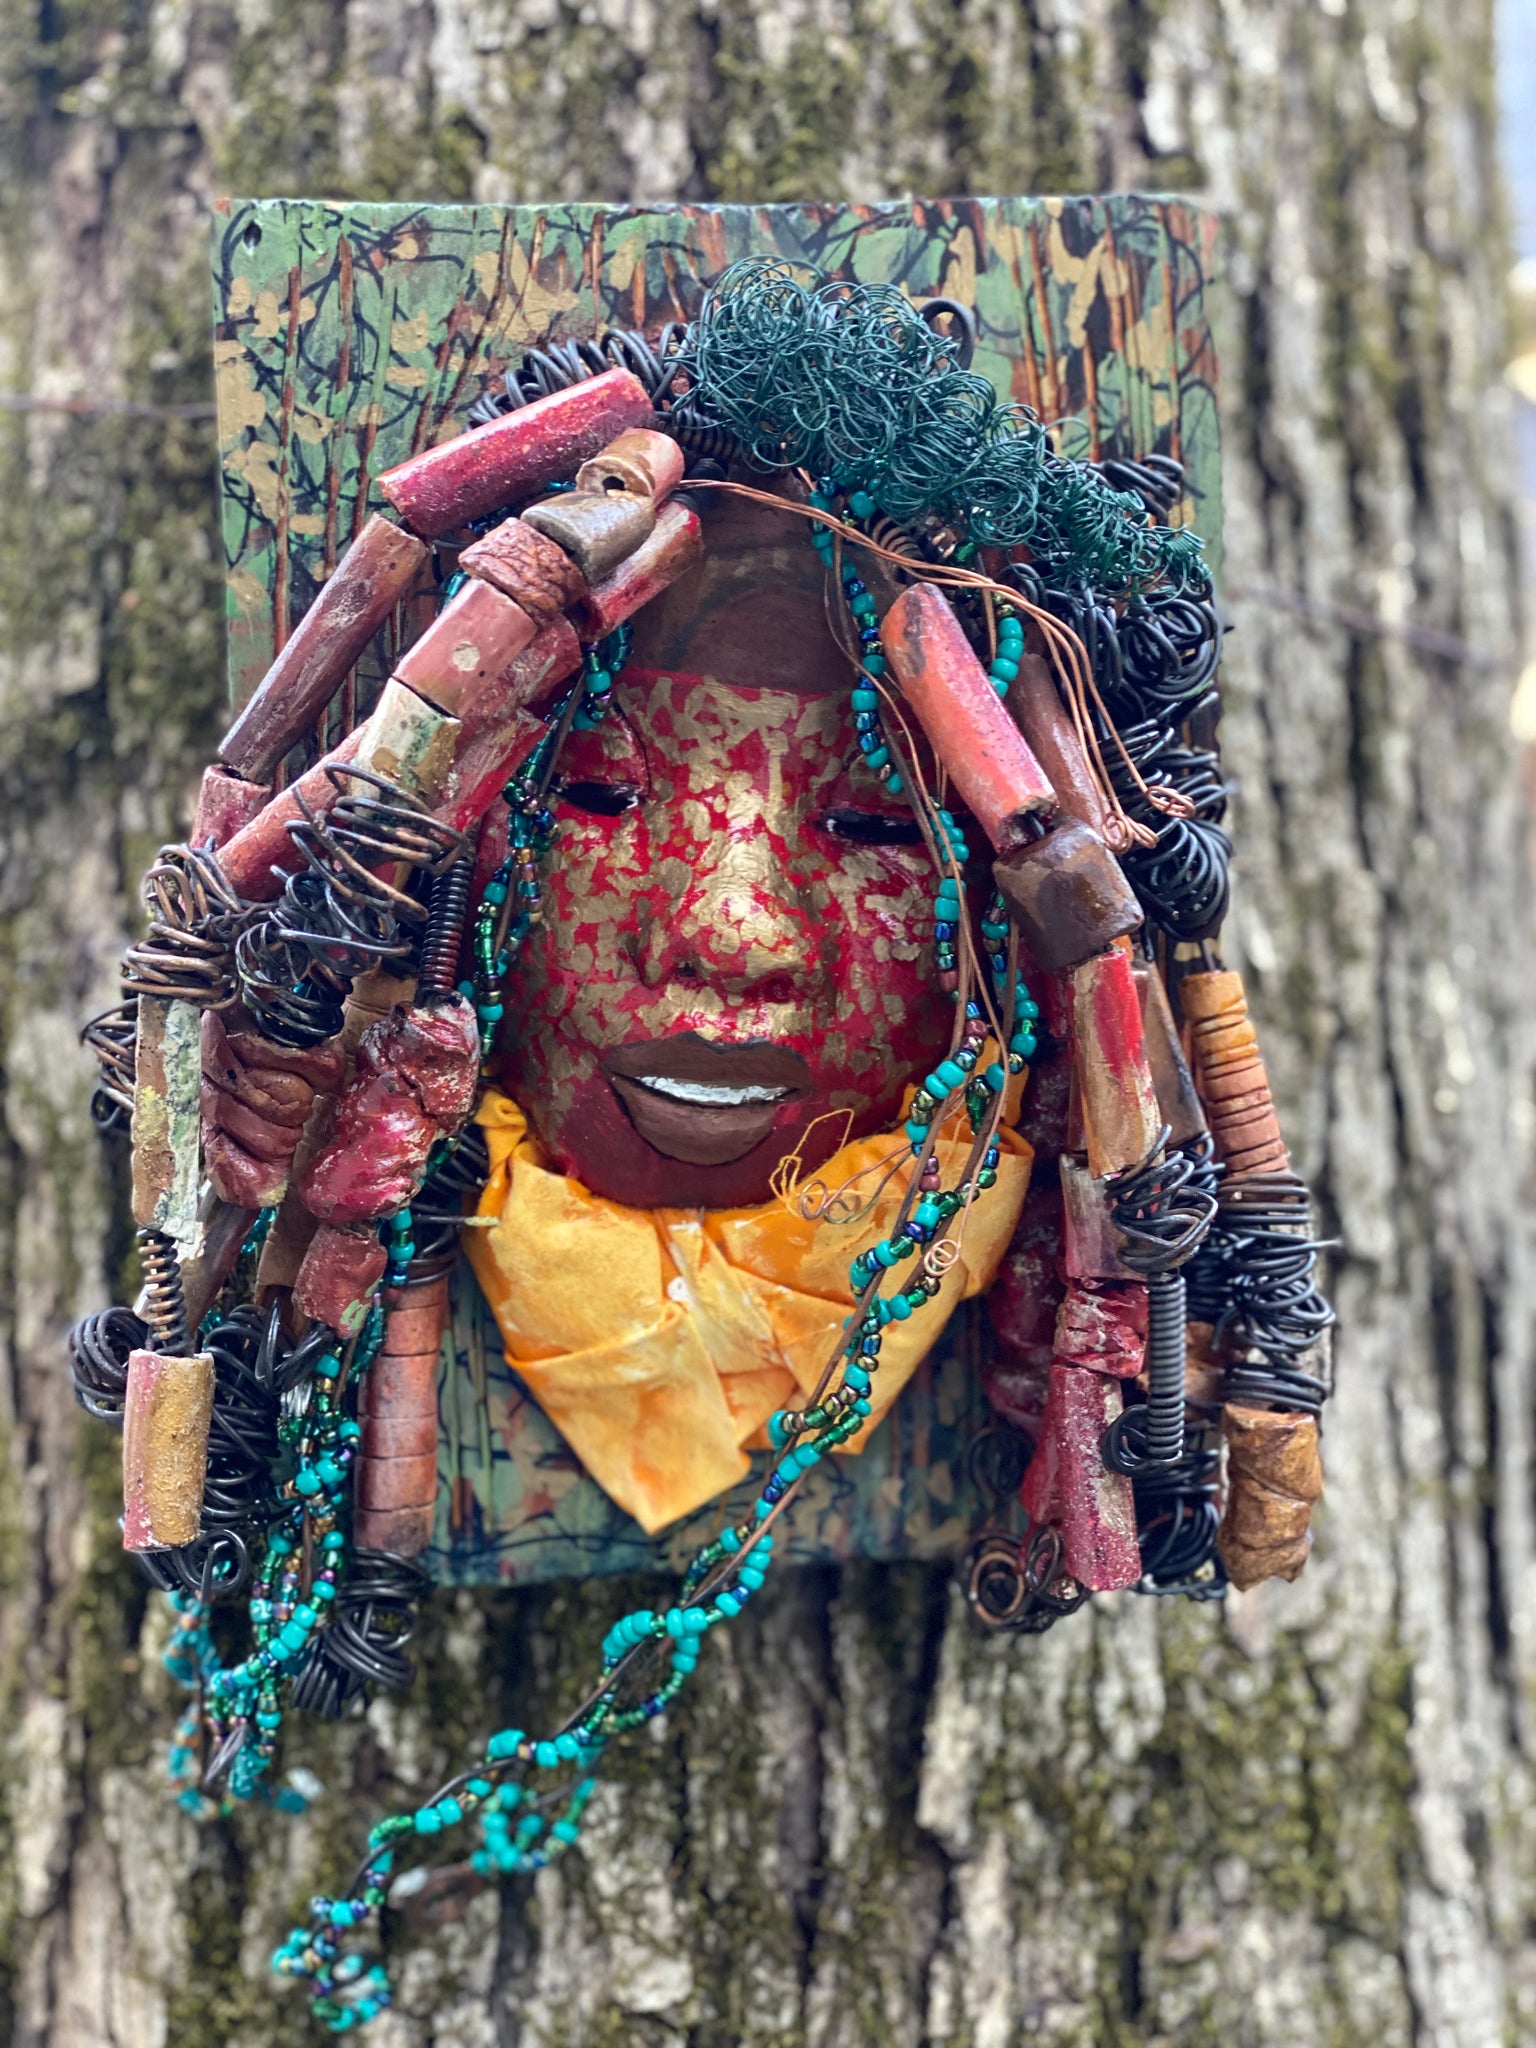 Deandra is one of a new 2022  series of tribal masks that are mounted on wood. I started making art soon after seeing authentic African artwork at the Smithsonian Museum of African Art. I was in total awe. Deandra is 7” x 10 x 1 and weighs 3.7 lbs.  She has a contagious smile. 25 handmade raku fired beads Over 60 mini 6mm multi colored beads  Over 60 feet of 16 and 24 gauge twisted wire for hair!